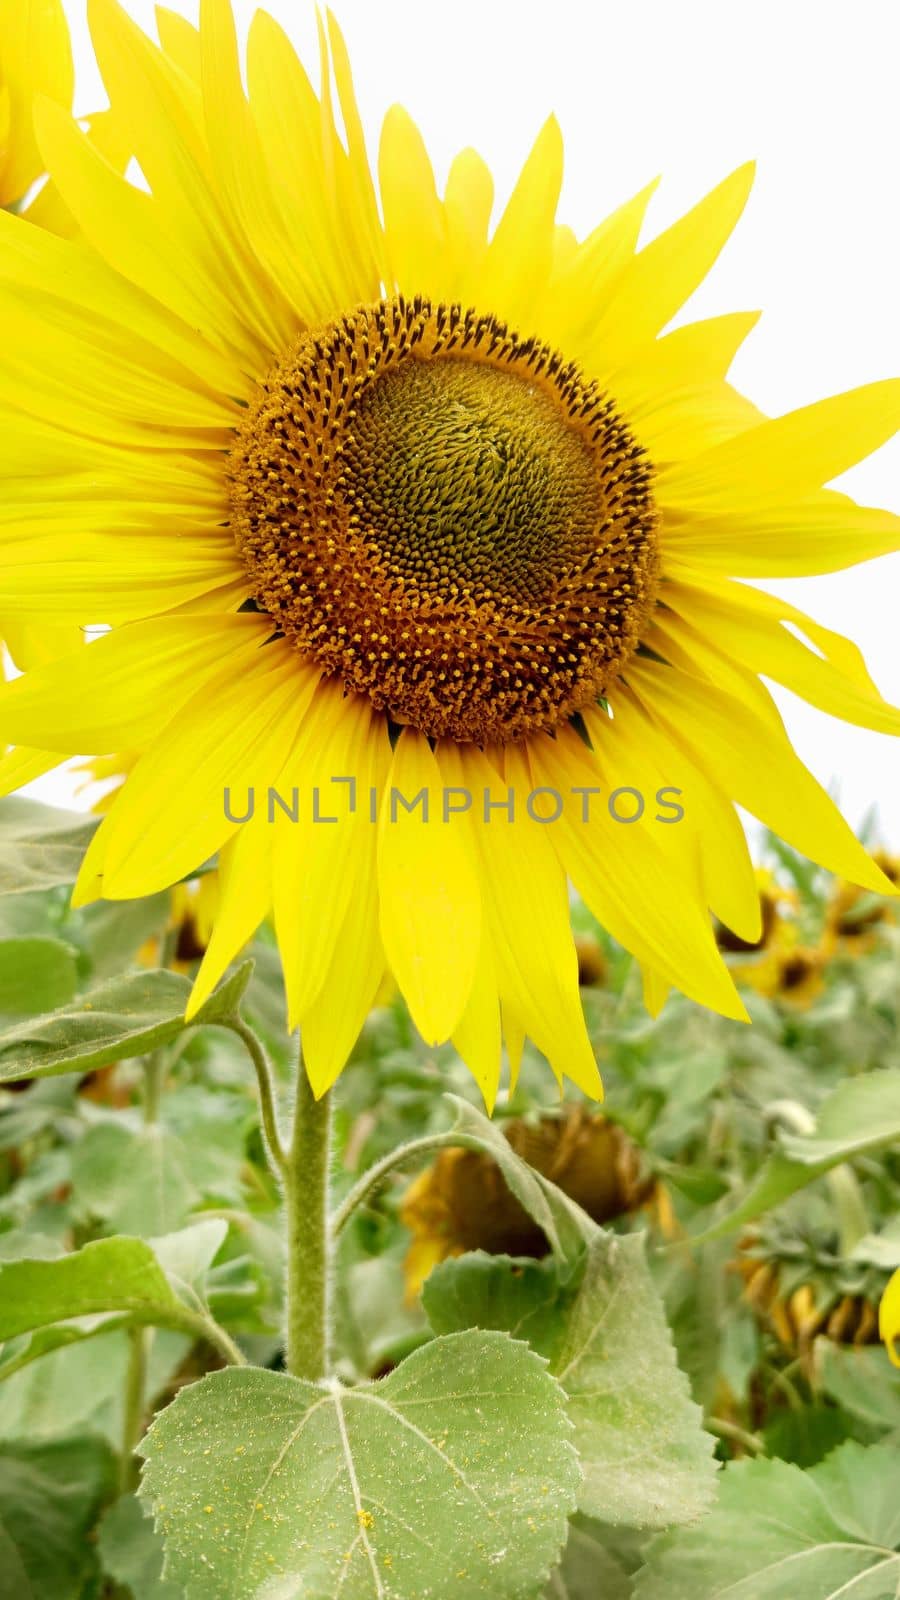 One yellow sunflower in the foreground in full bloom on a cloudy day by Mastak80